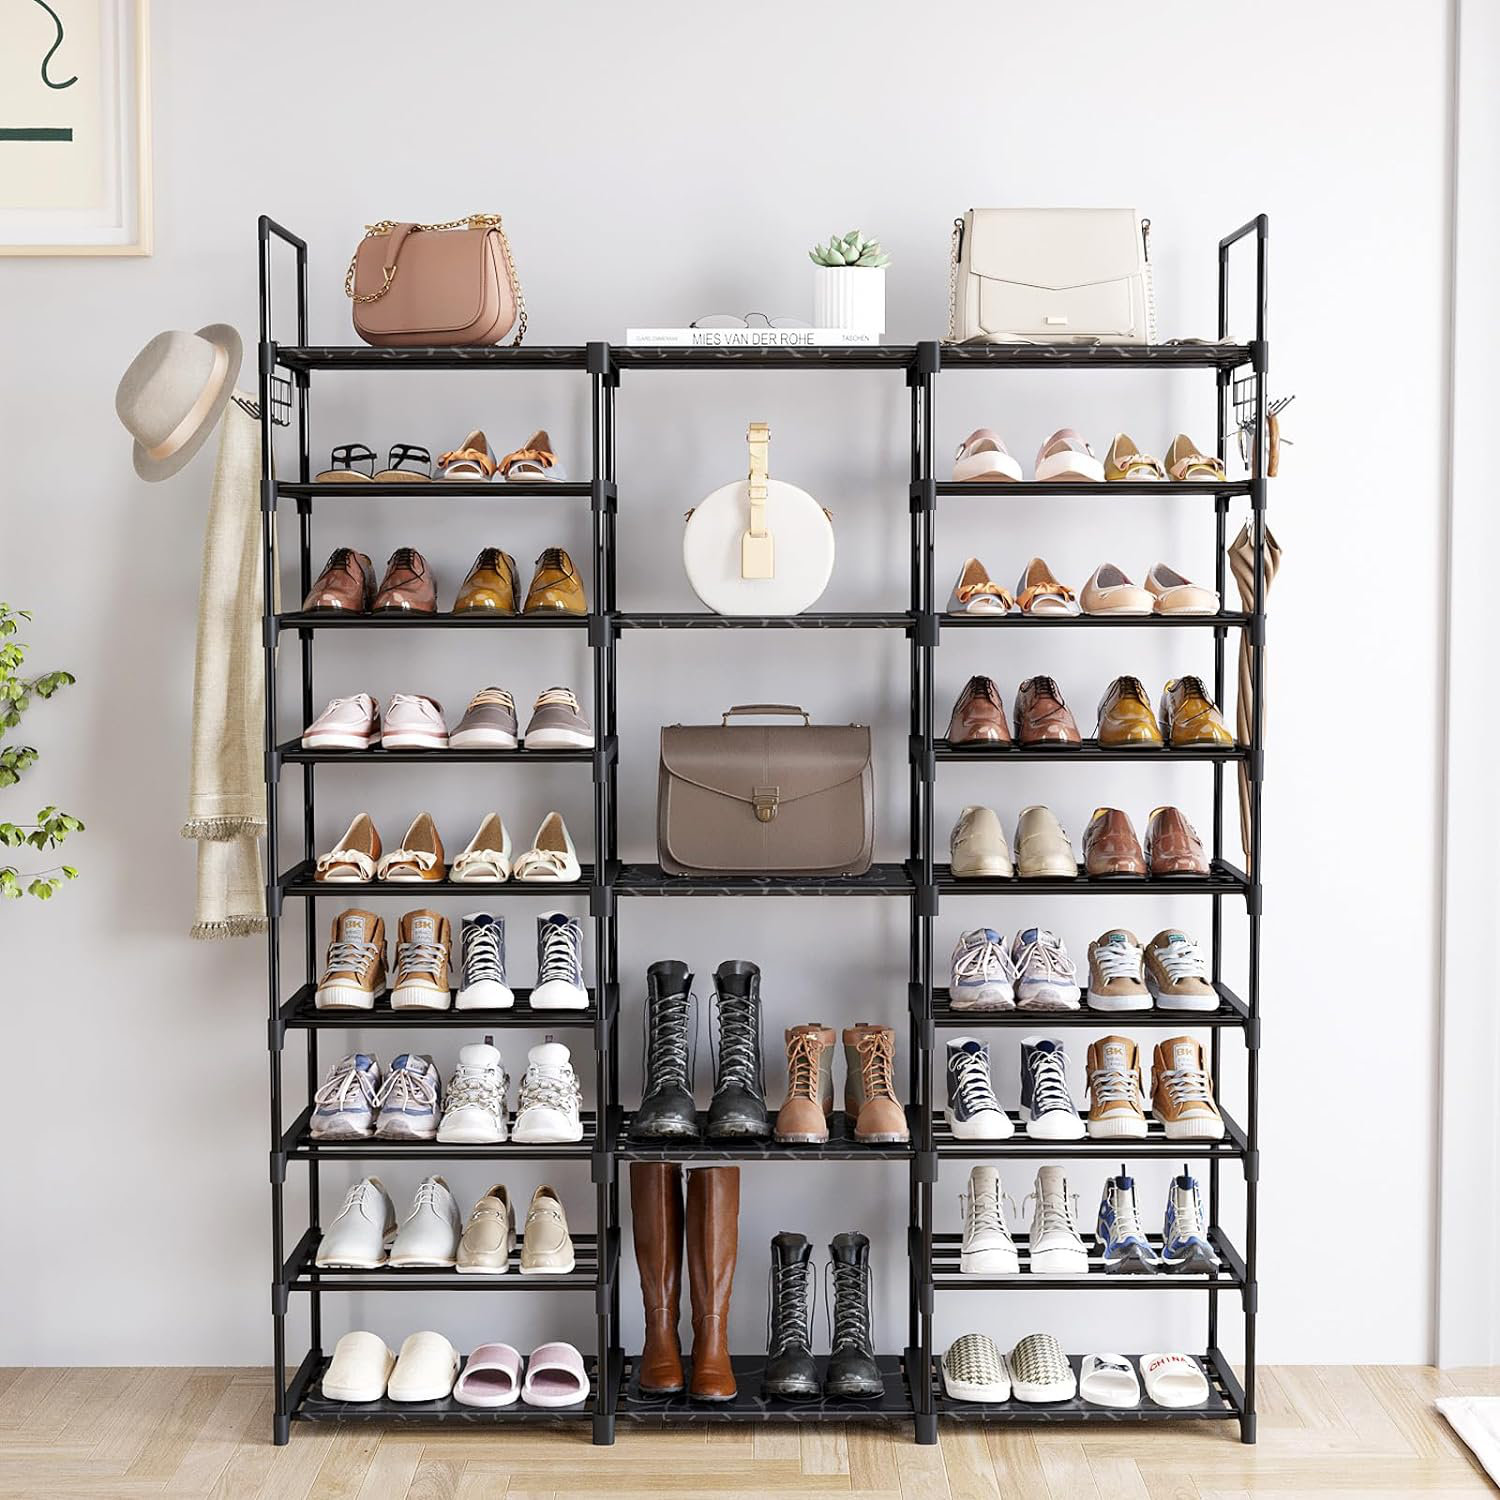 9-Tier Shoe Rack Storage Organizer for Entryway Holds 50-55 Pairs